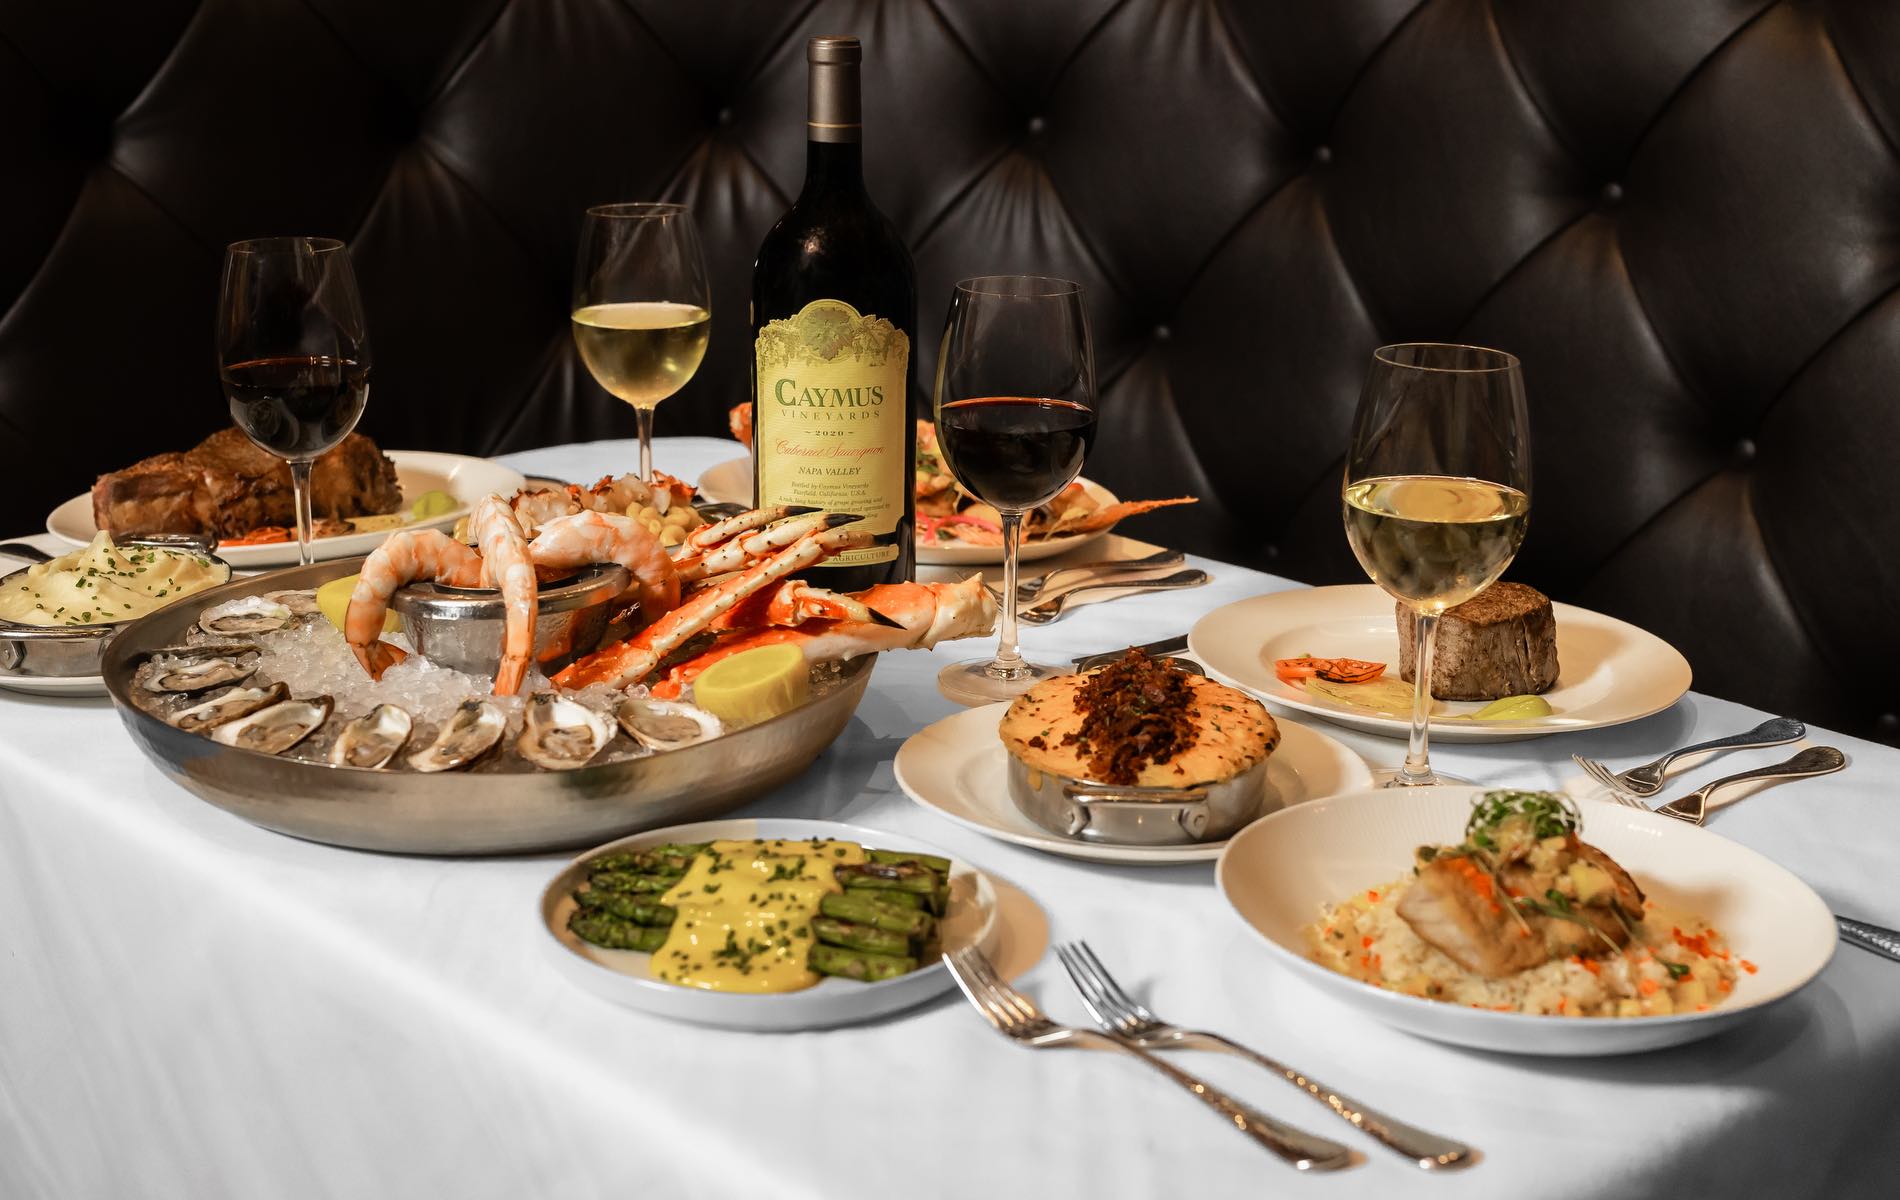 Caymus wine, caymus happy hour, 30a restaurant, 30a happy hour, high end dining, steakhouse, seafood restaurant 30a